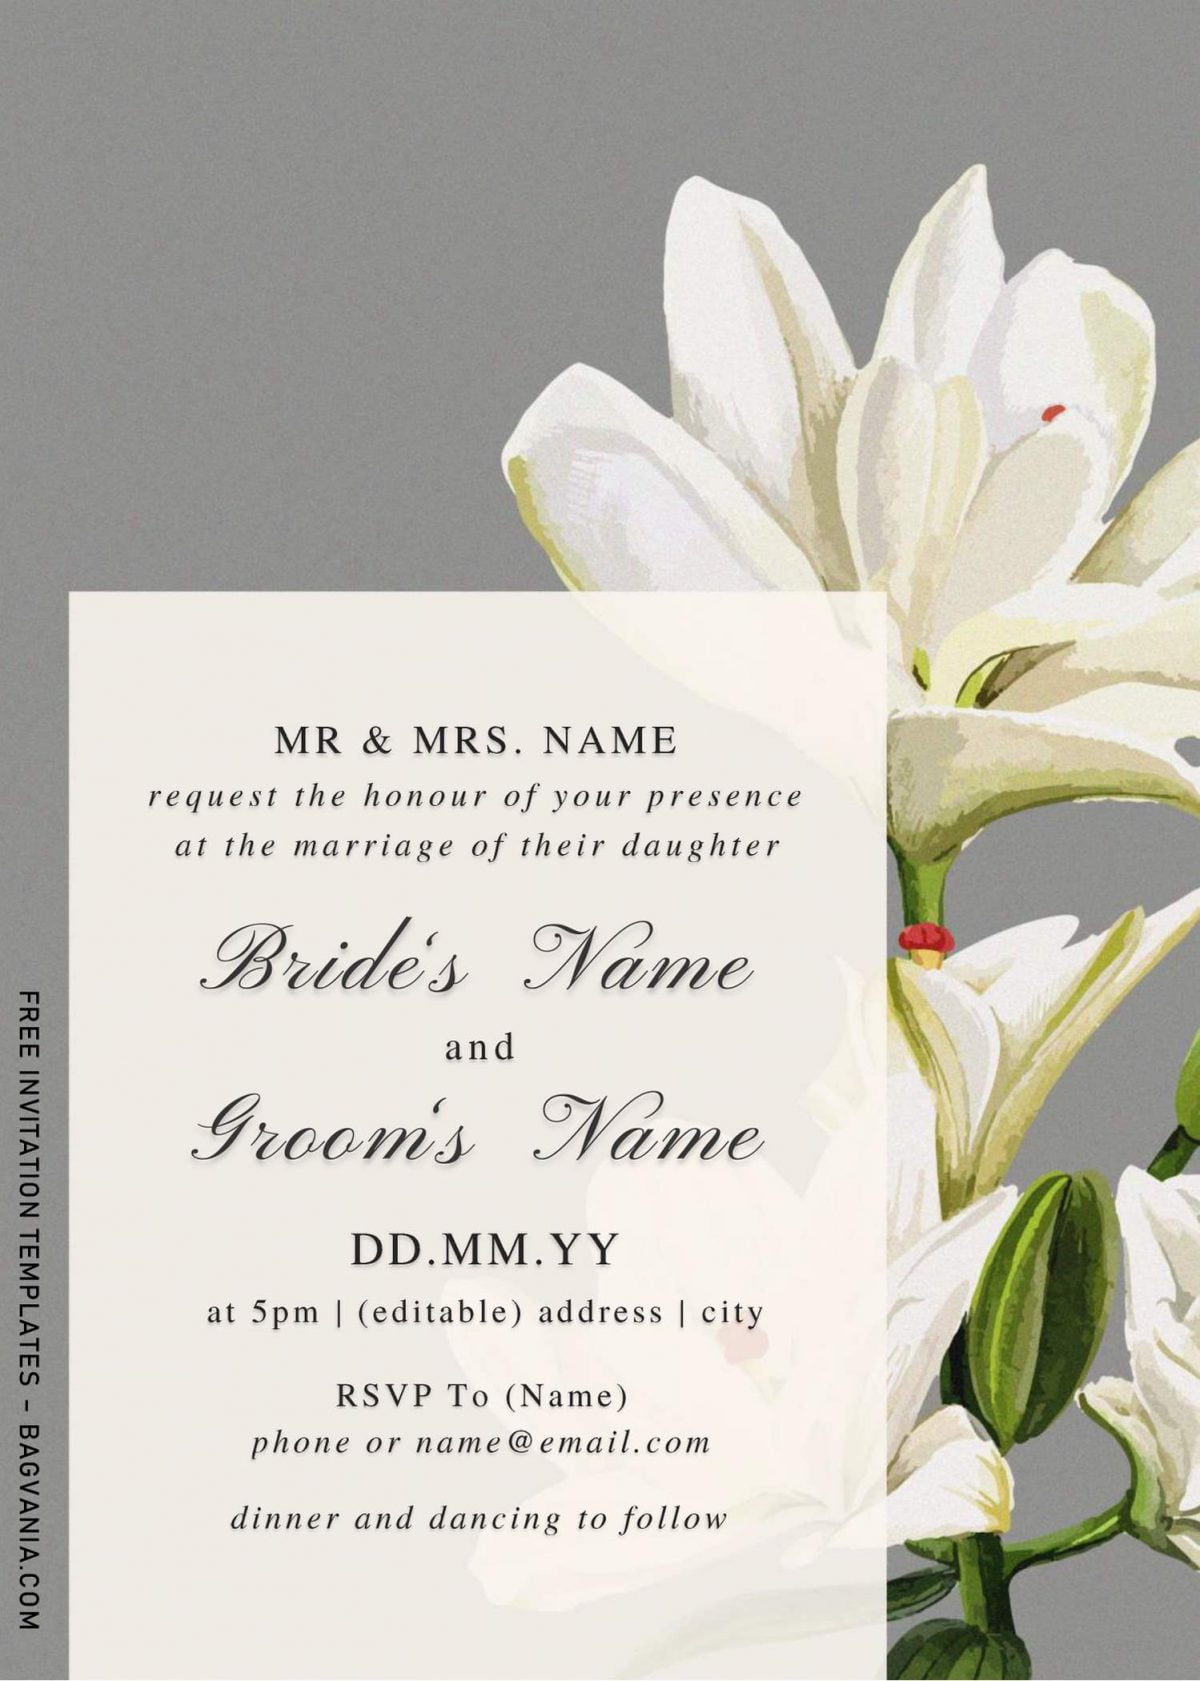 Free Watercolor Lily Wedding Invitation Templates For Word and has owl grey background